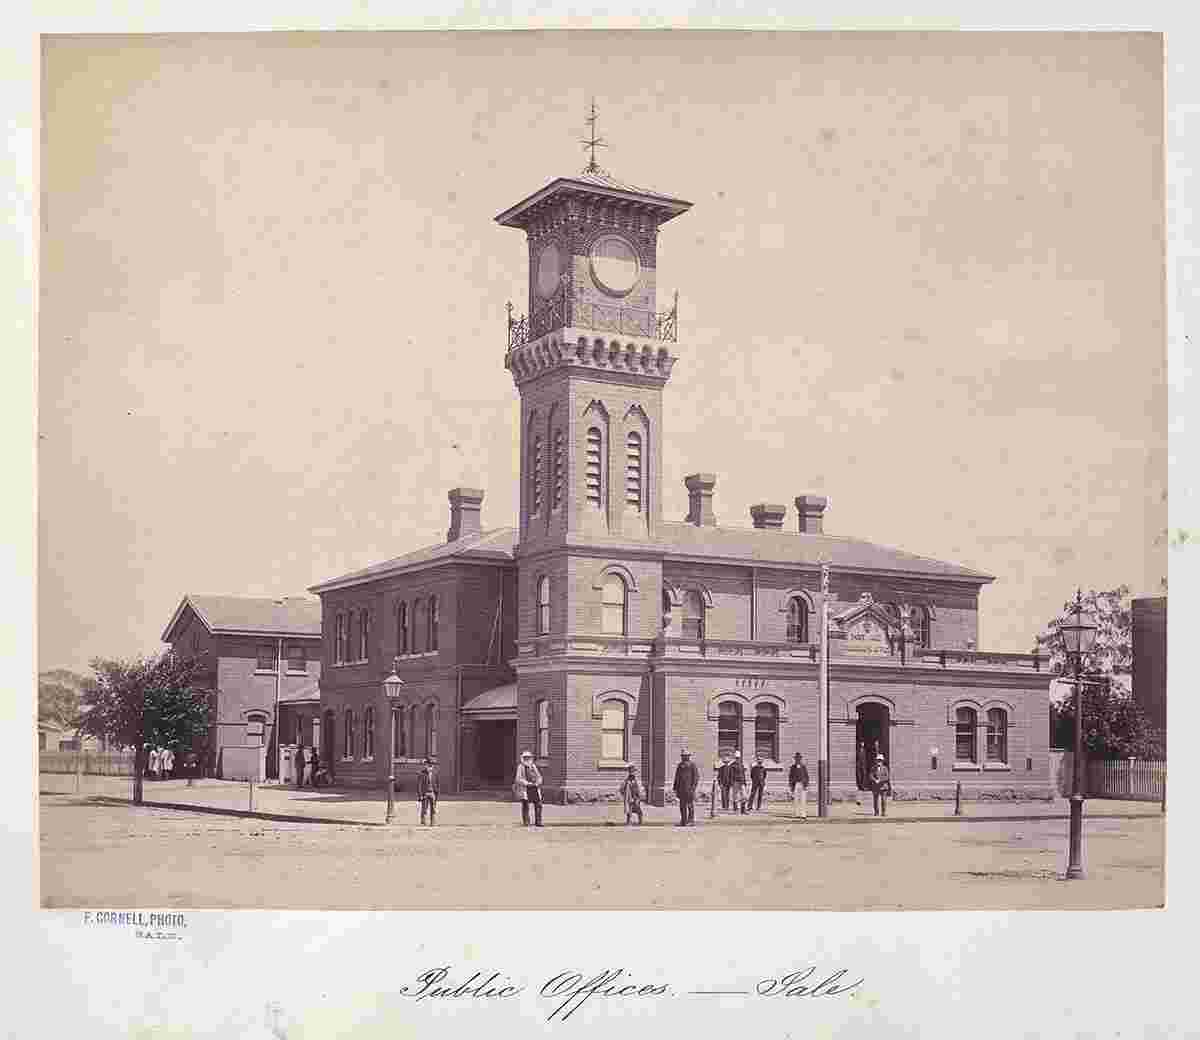 Sale. Post and Telegraph Office, between 1866 and 1885